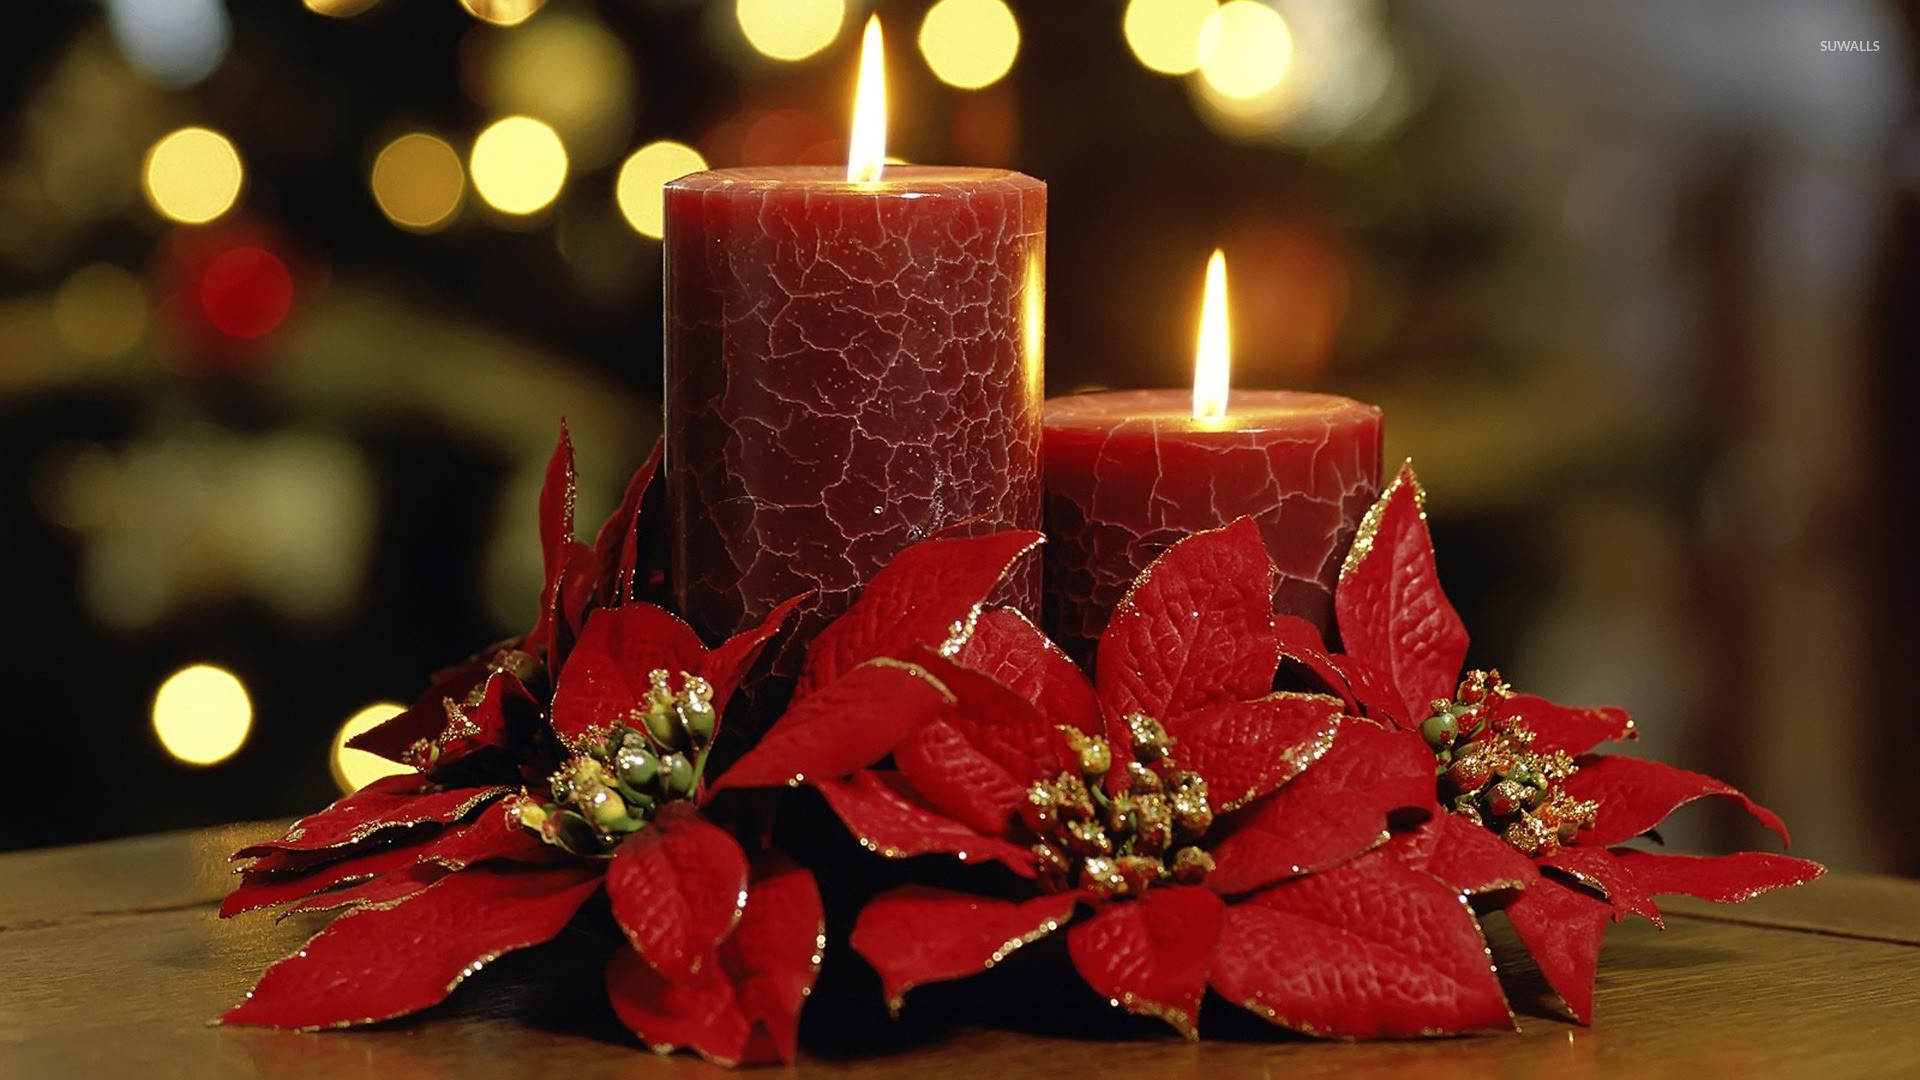 Candle Flower Live Wallpaper - Apps on Google Play-mncb.edu.vn